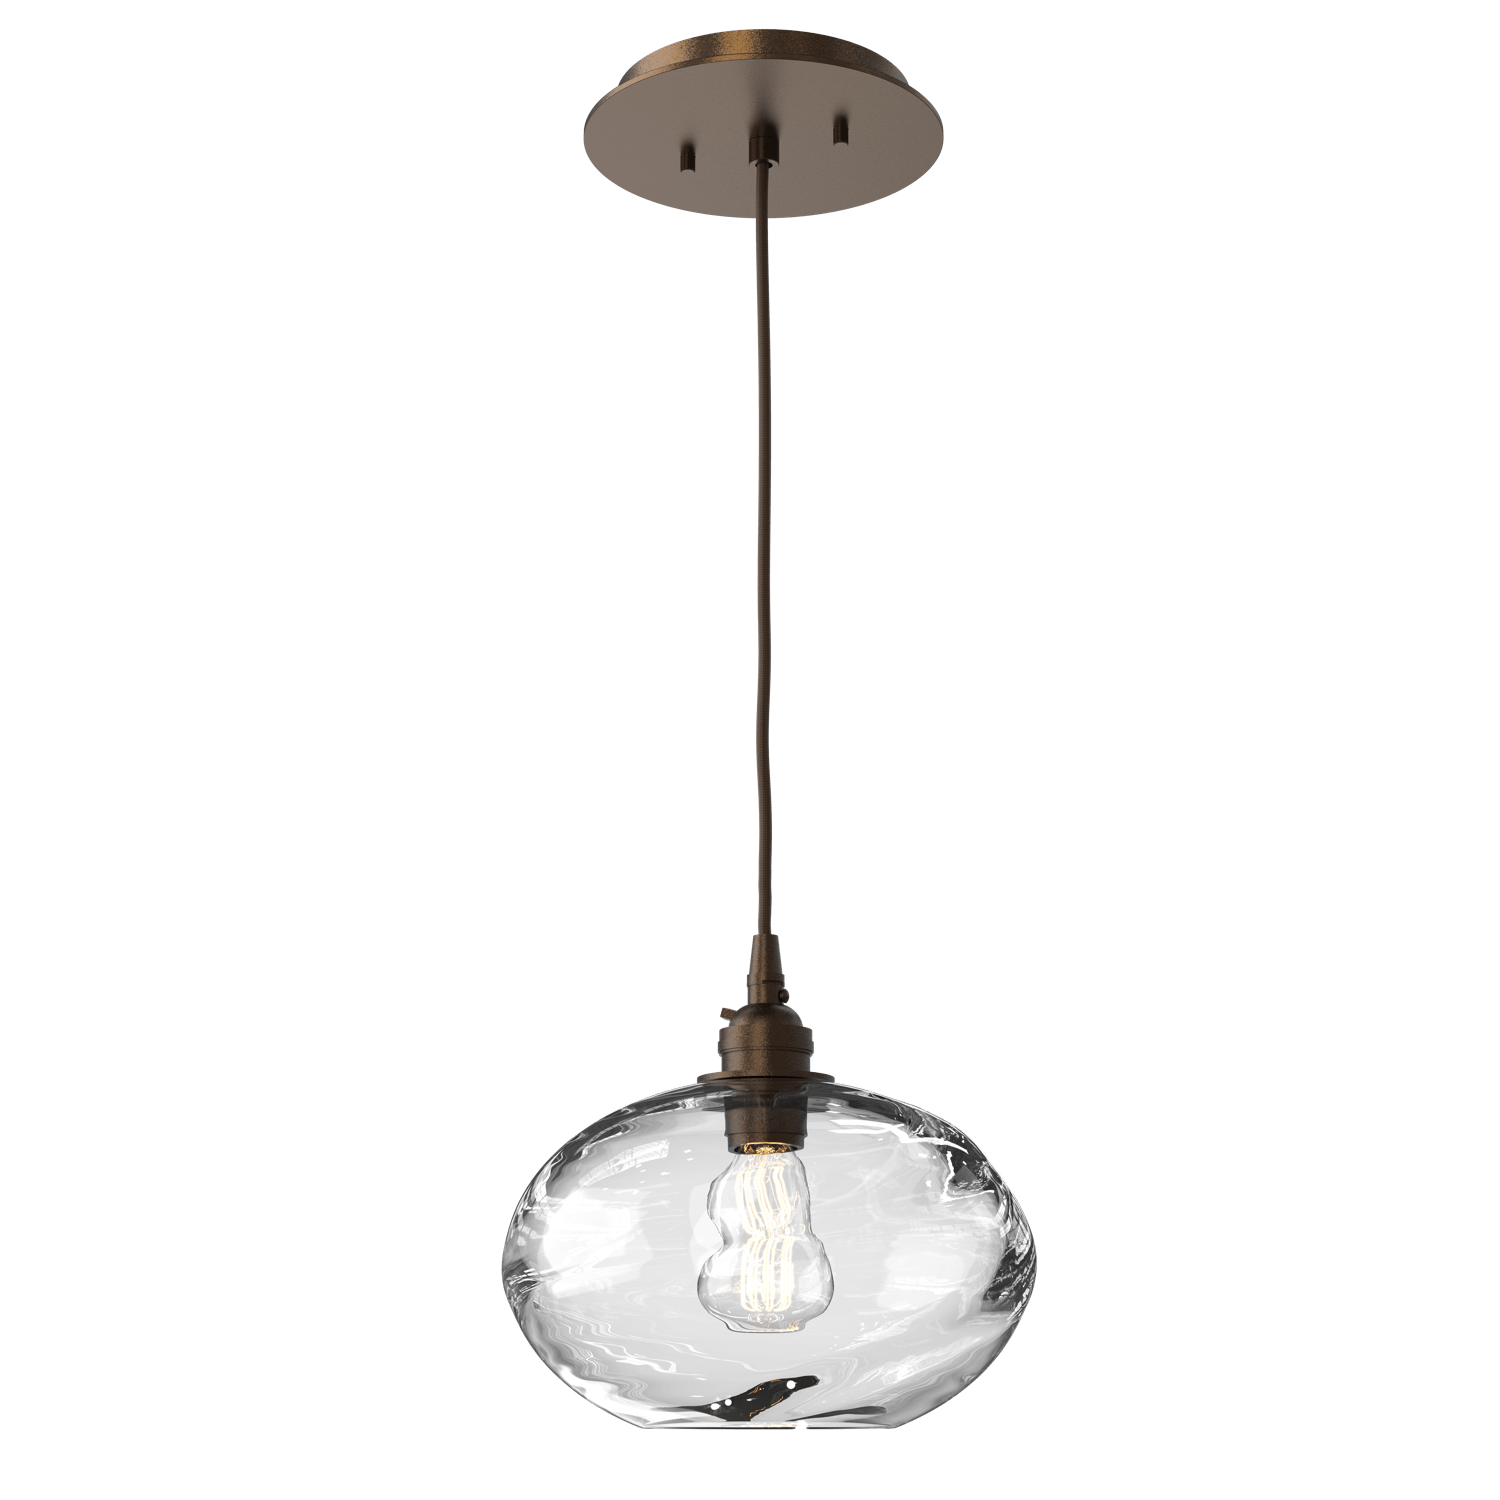 LAB0036-01-FB-OC-Hammerton-Studio-Optic-Blown-Glass-Coppa-pendant-light-with-flat-bronze-finish-and-optic-clear-blown-glass-shades-and-incandescent-lamping